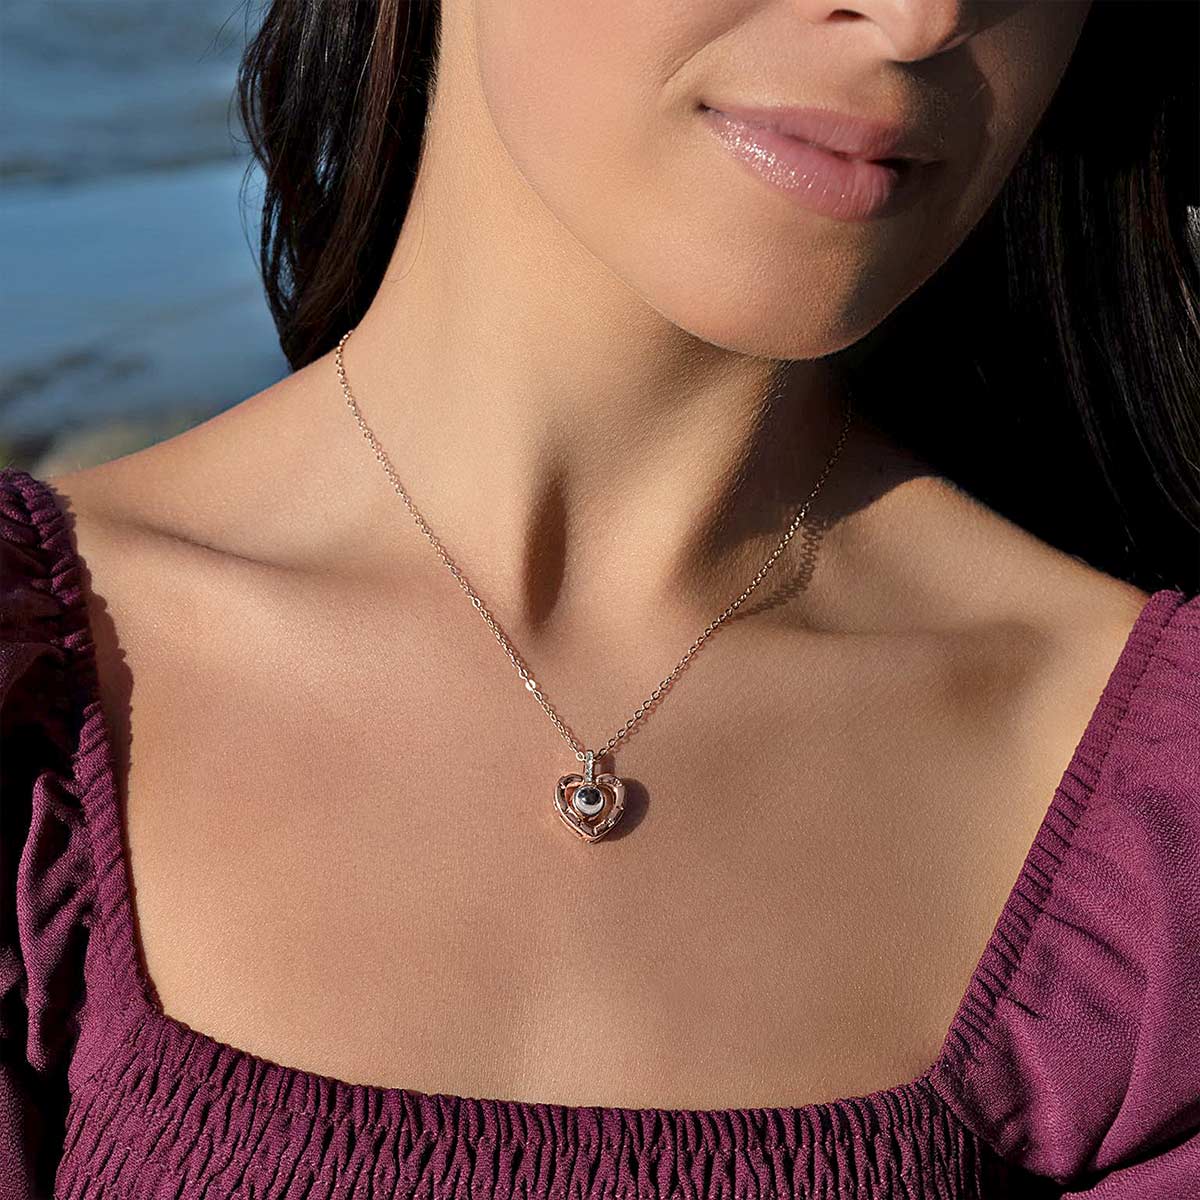 To My Daughter the Beauty, From Mom - Hidden Love Heart Edition Rose Gold Necklace Gift Set